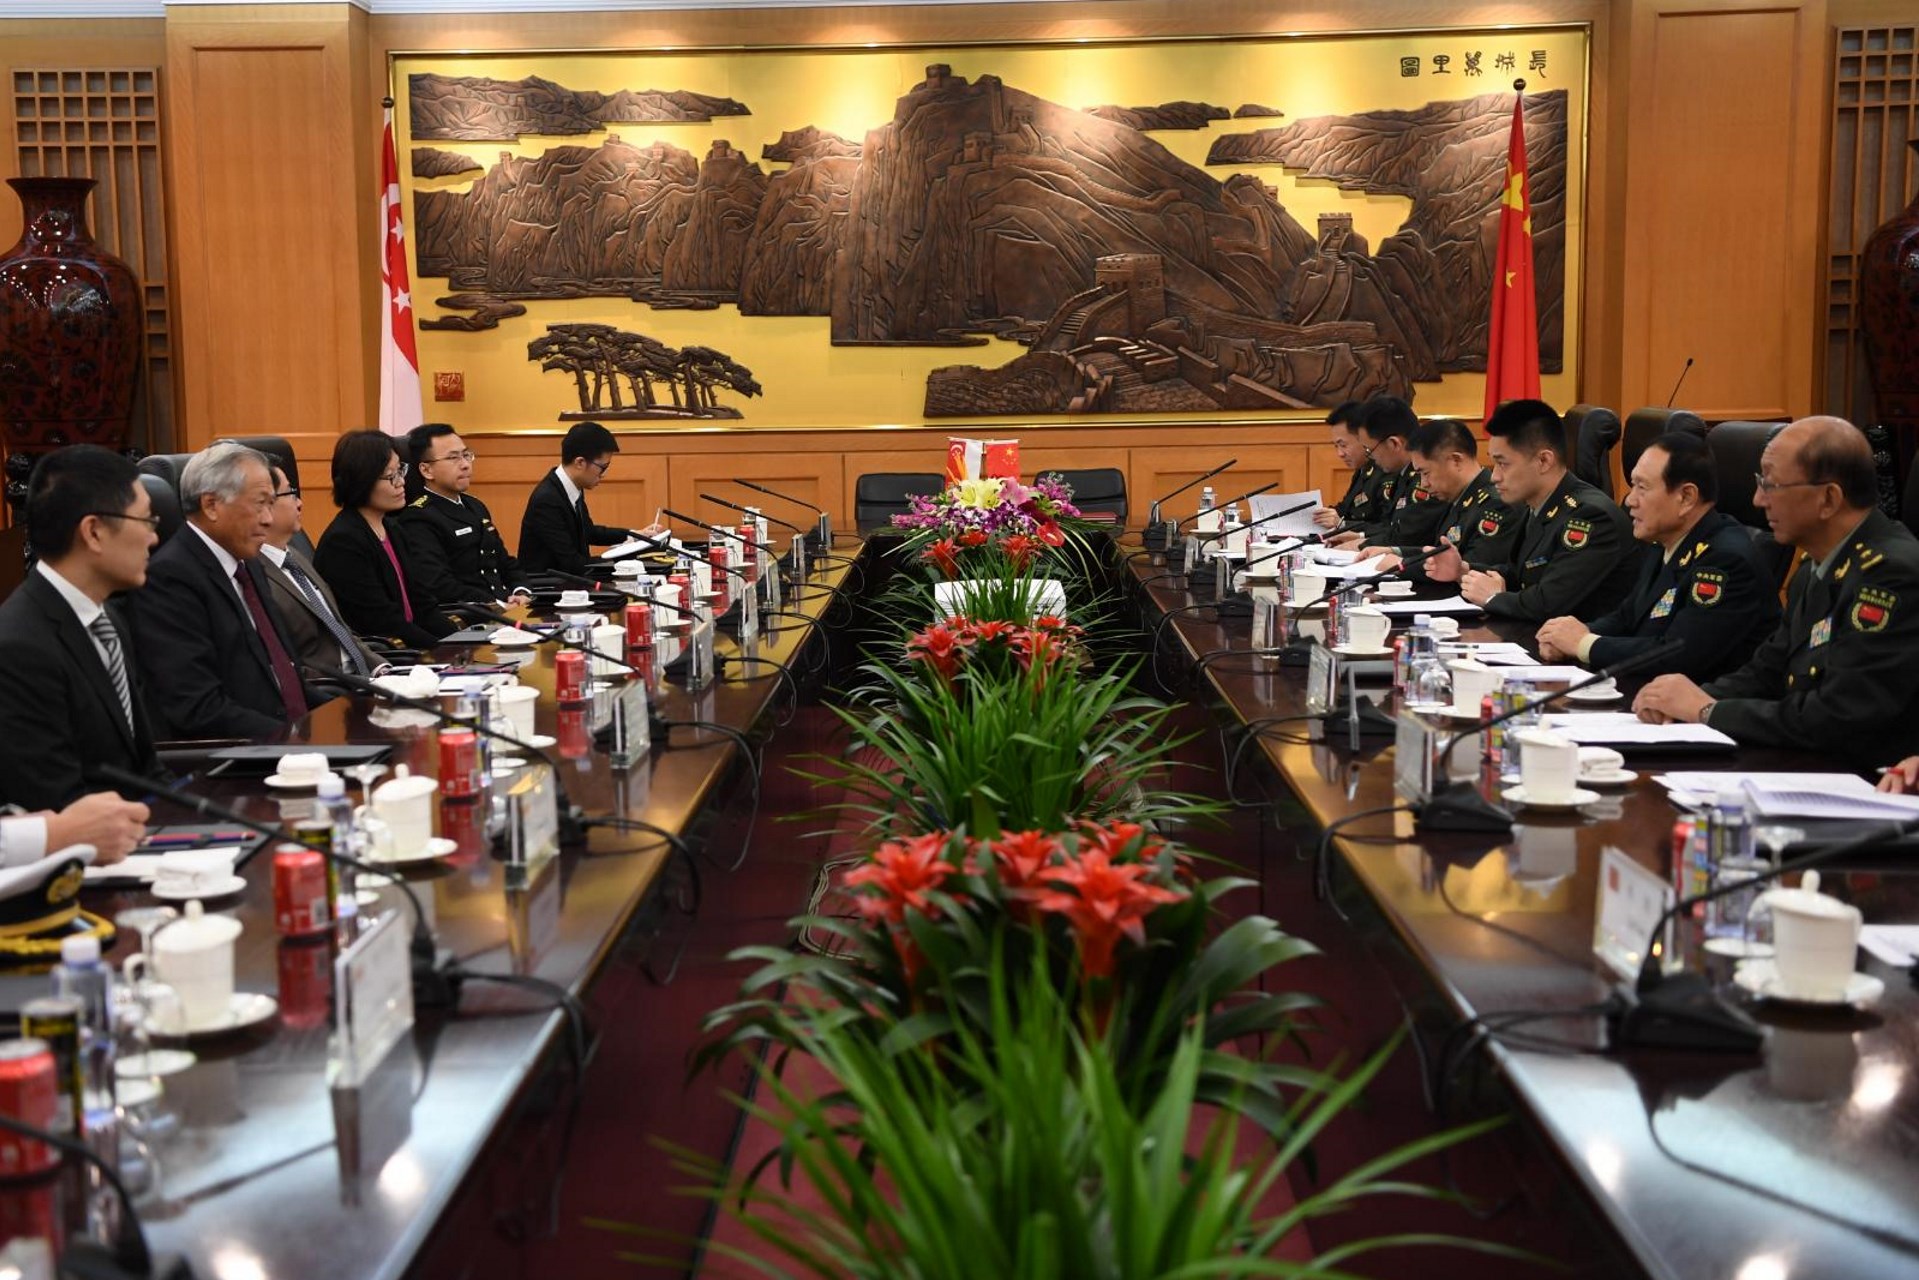 Dr Ng (second from left) and GEN Wei (second from right) during the meeting at Bayi Building in Beijing, China this morning.